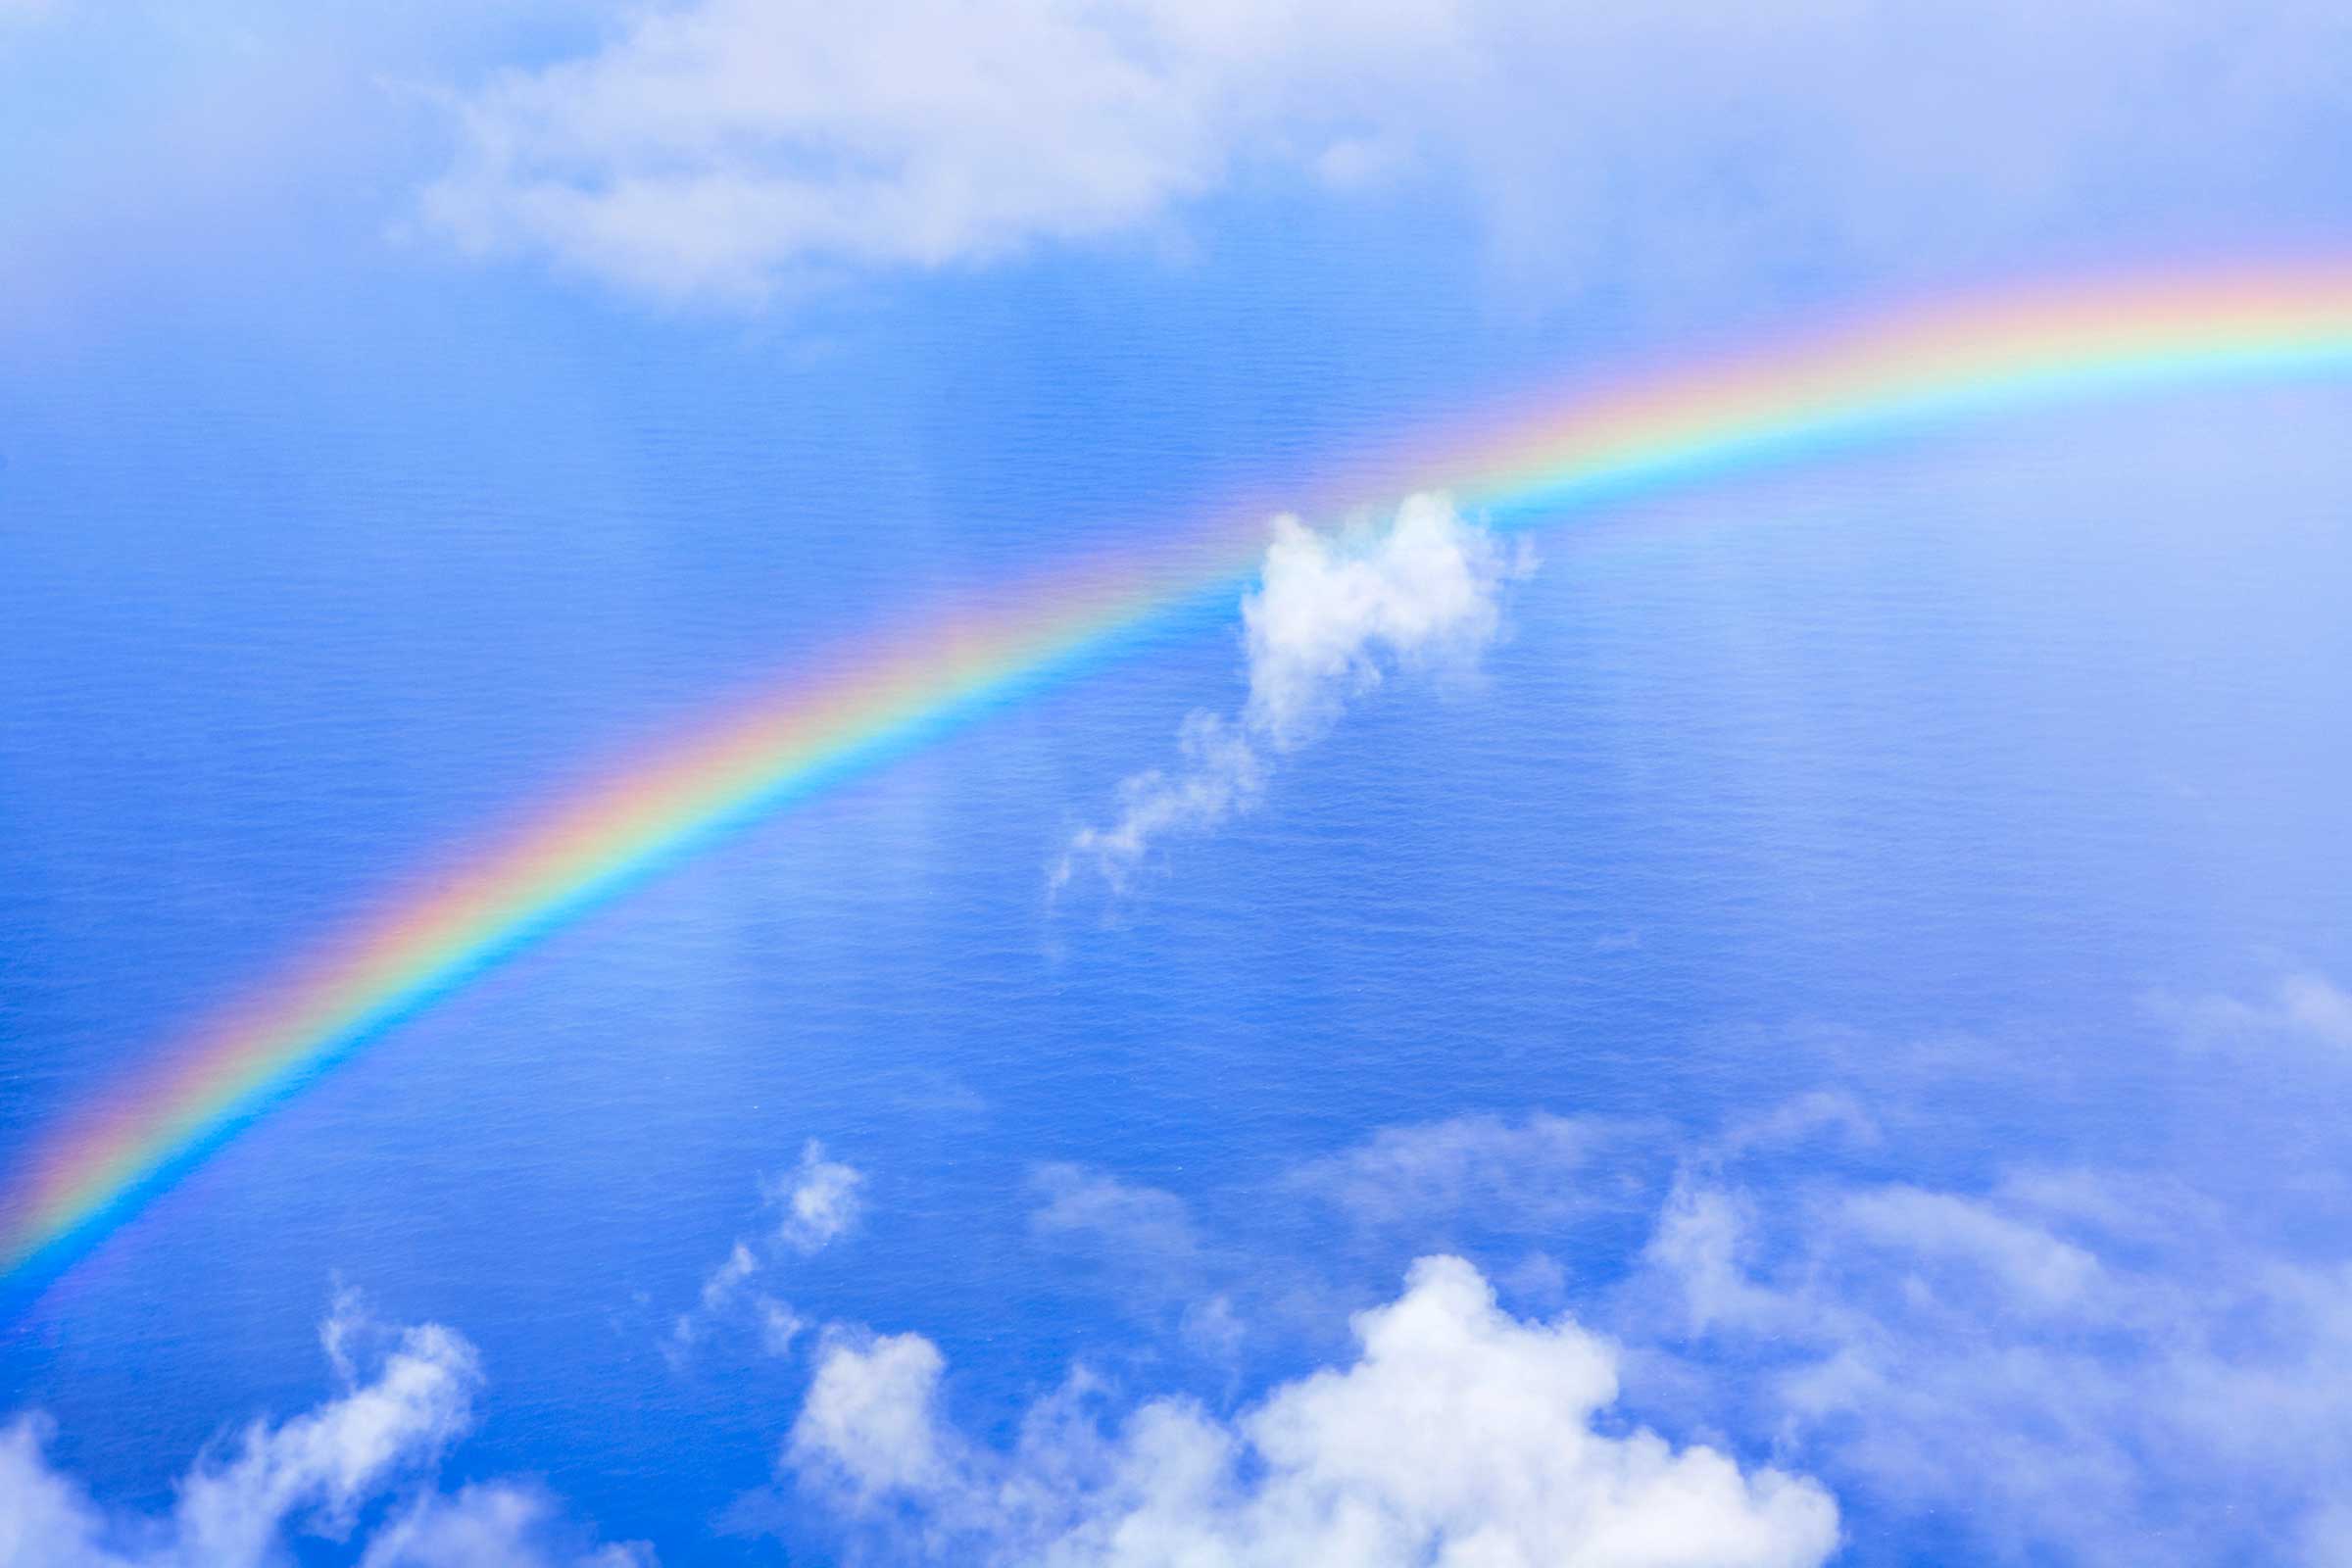 Colorful Facts and Pictures of Rainbows | Reader's Digest